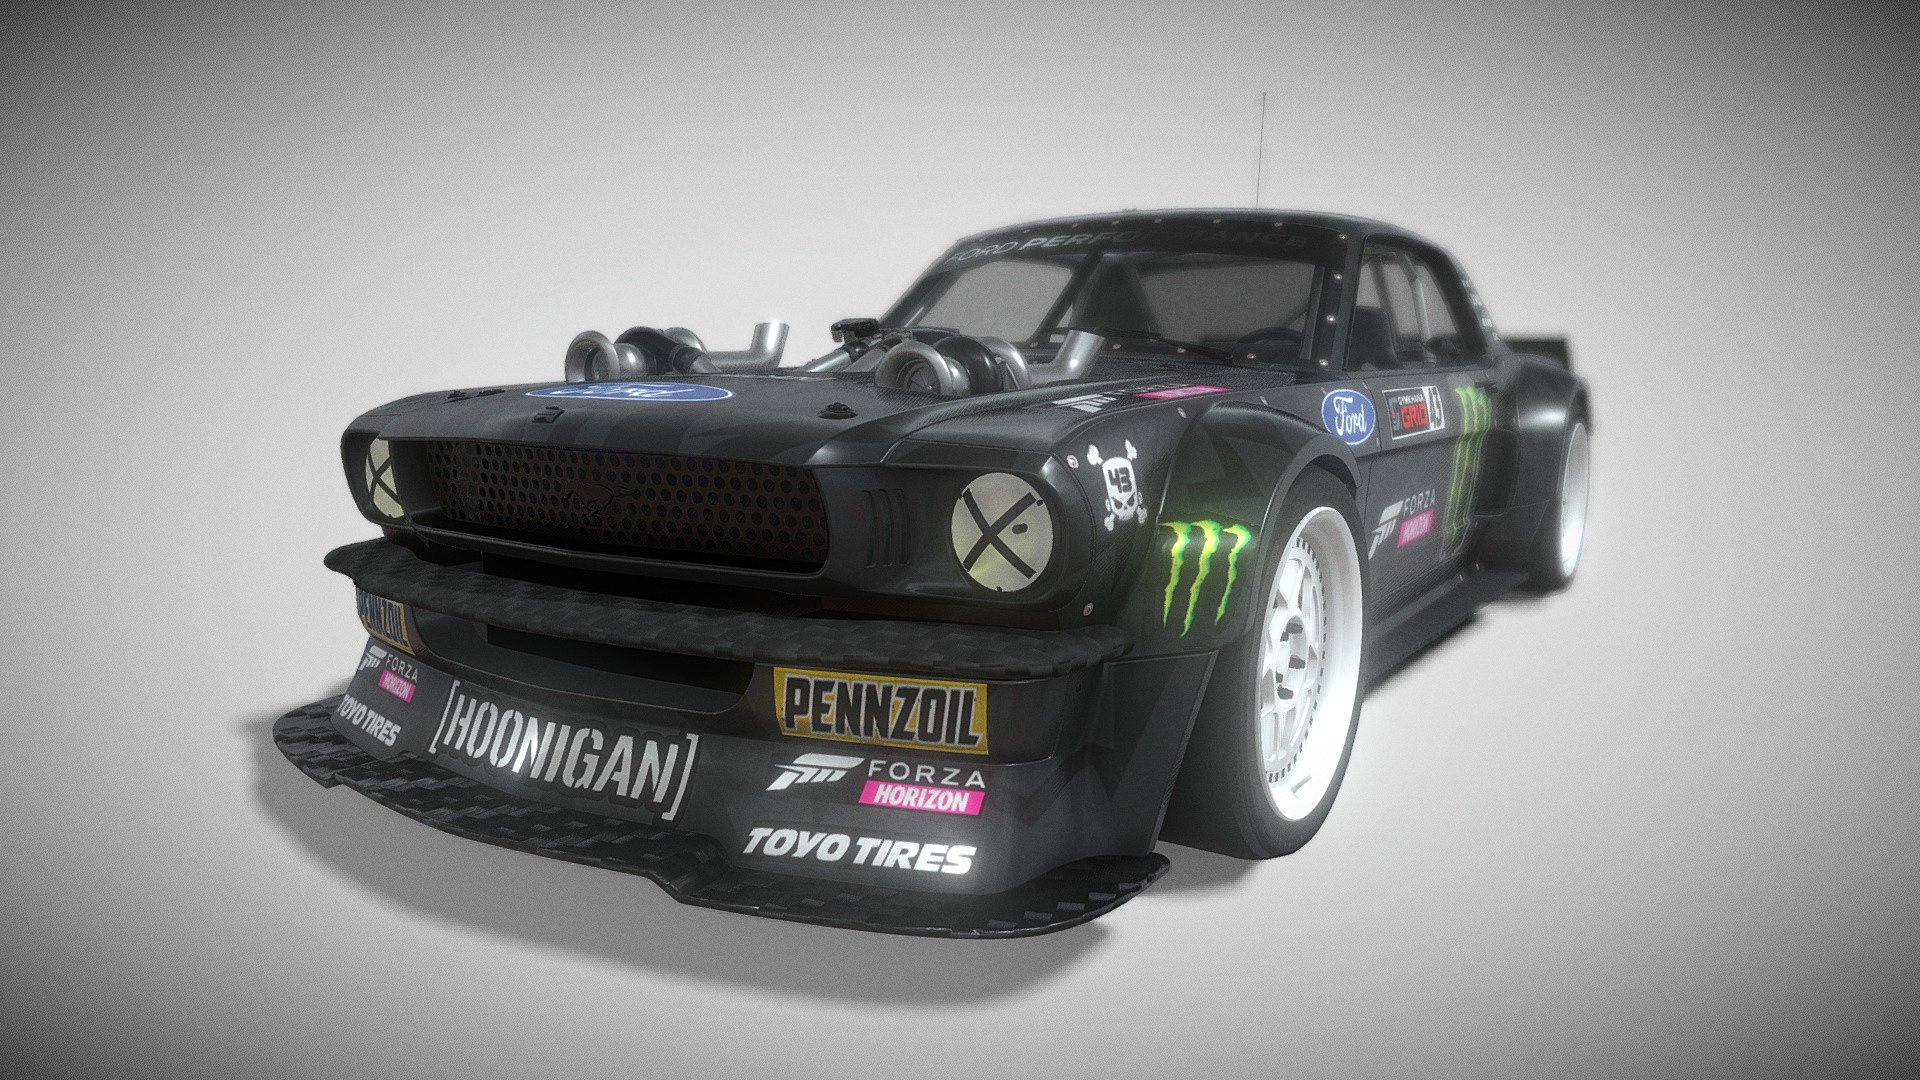 I do not believe in making money from people's passing&hellip;
I believe in respecting them.
Therefore, I will put this for free.


KB43FOREVER - Hoonicorn- A tribute to Ken Block - Download Free 3D model by Chaserfan 3d model